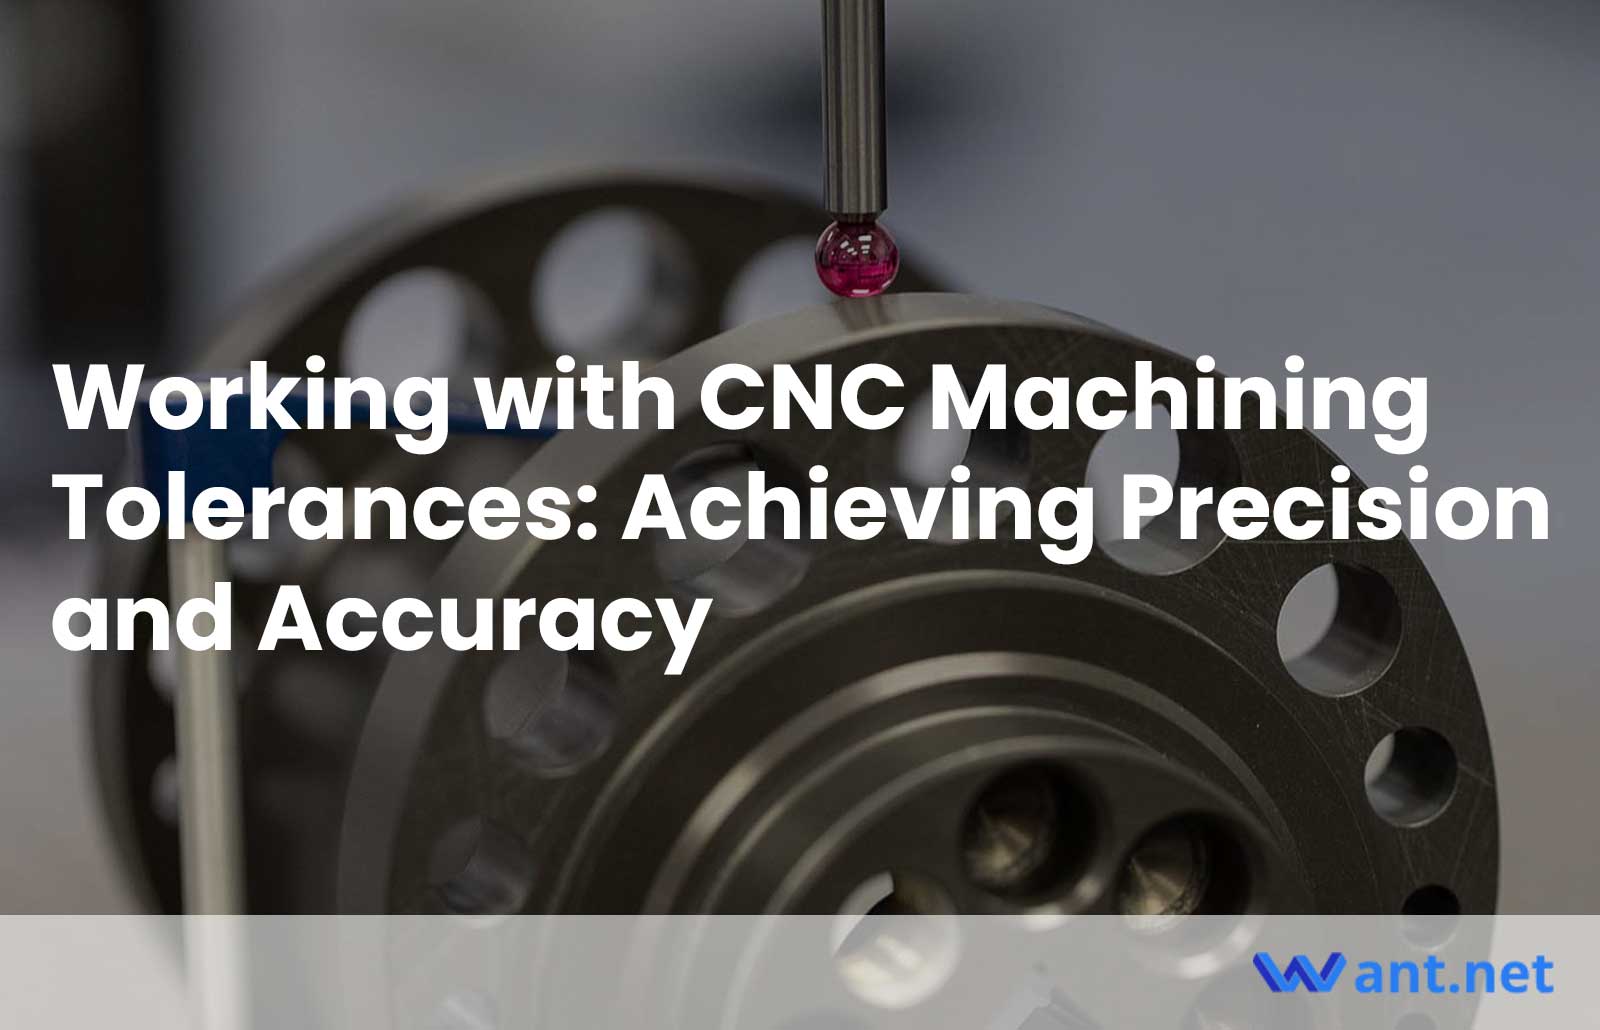 Working with CNC Machining Tolerances: Achieving Precision and Accuracy